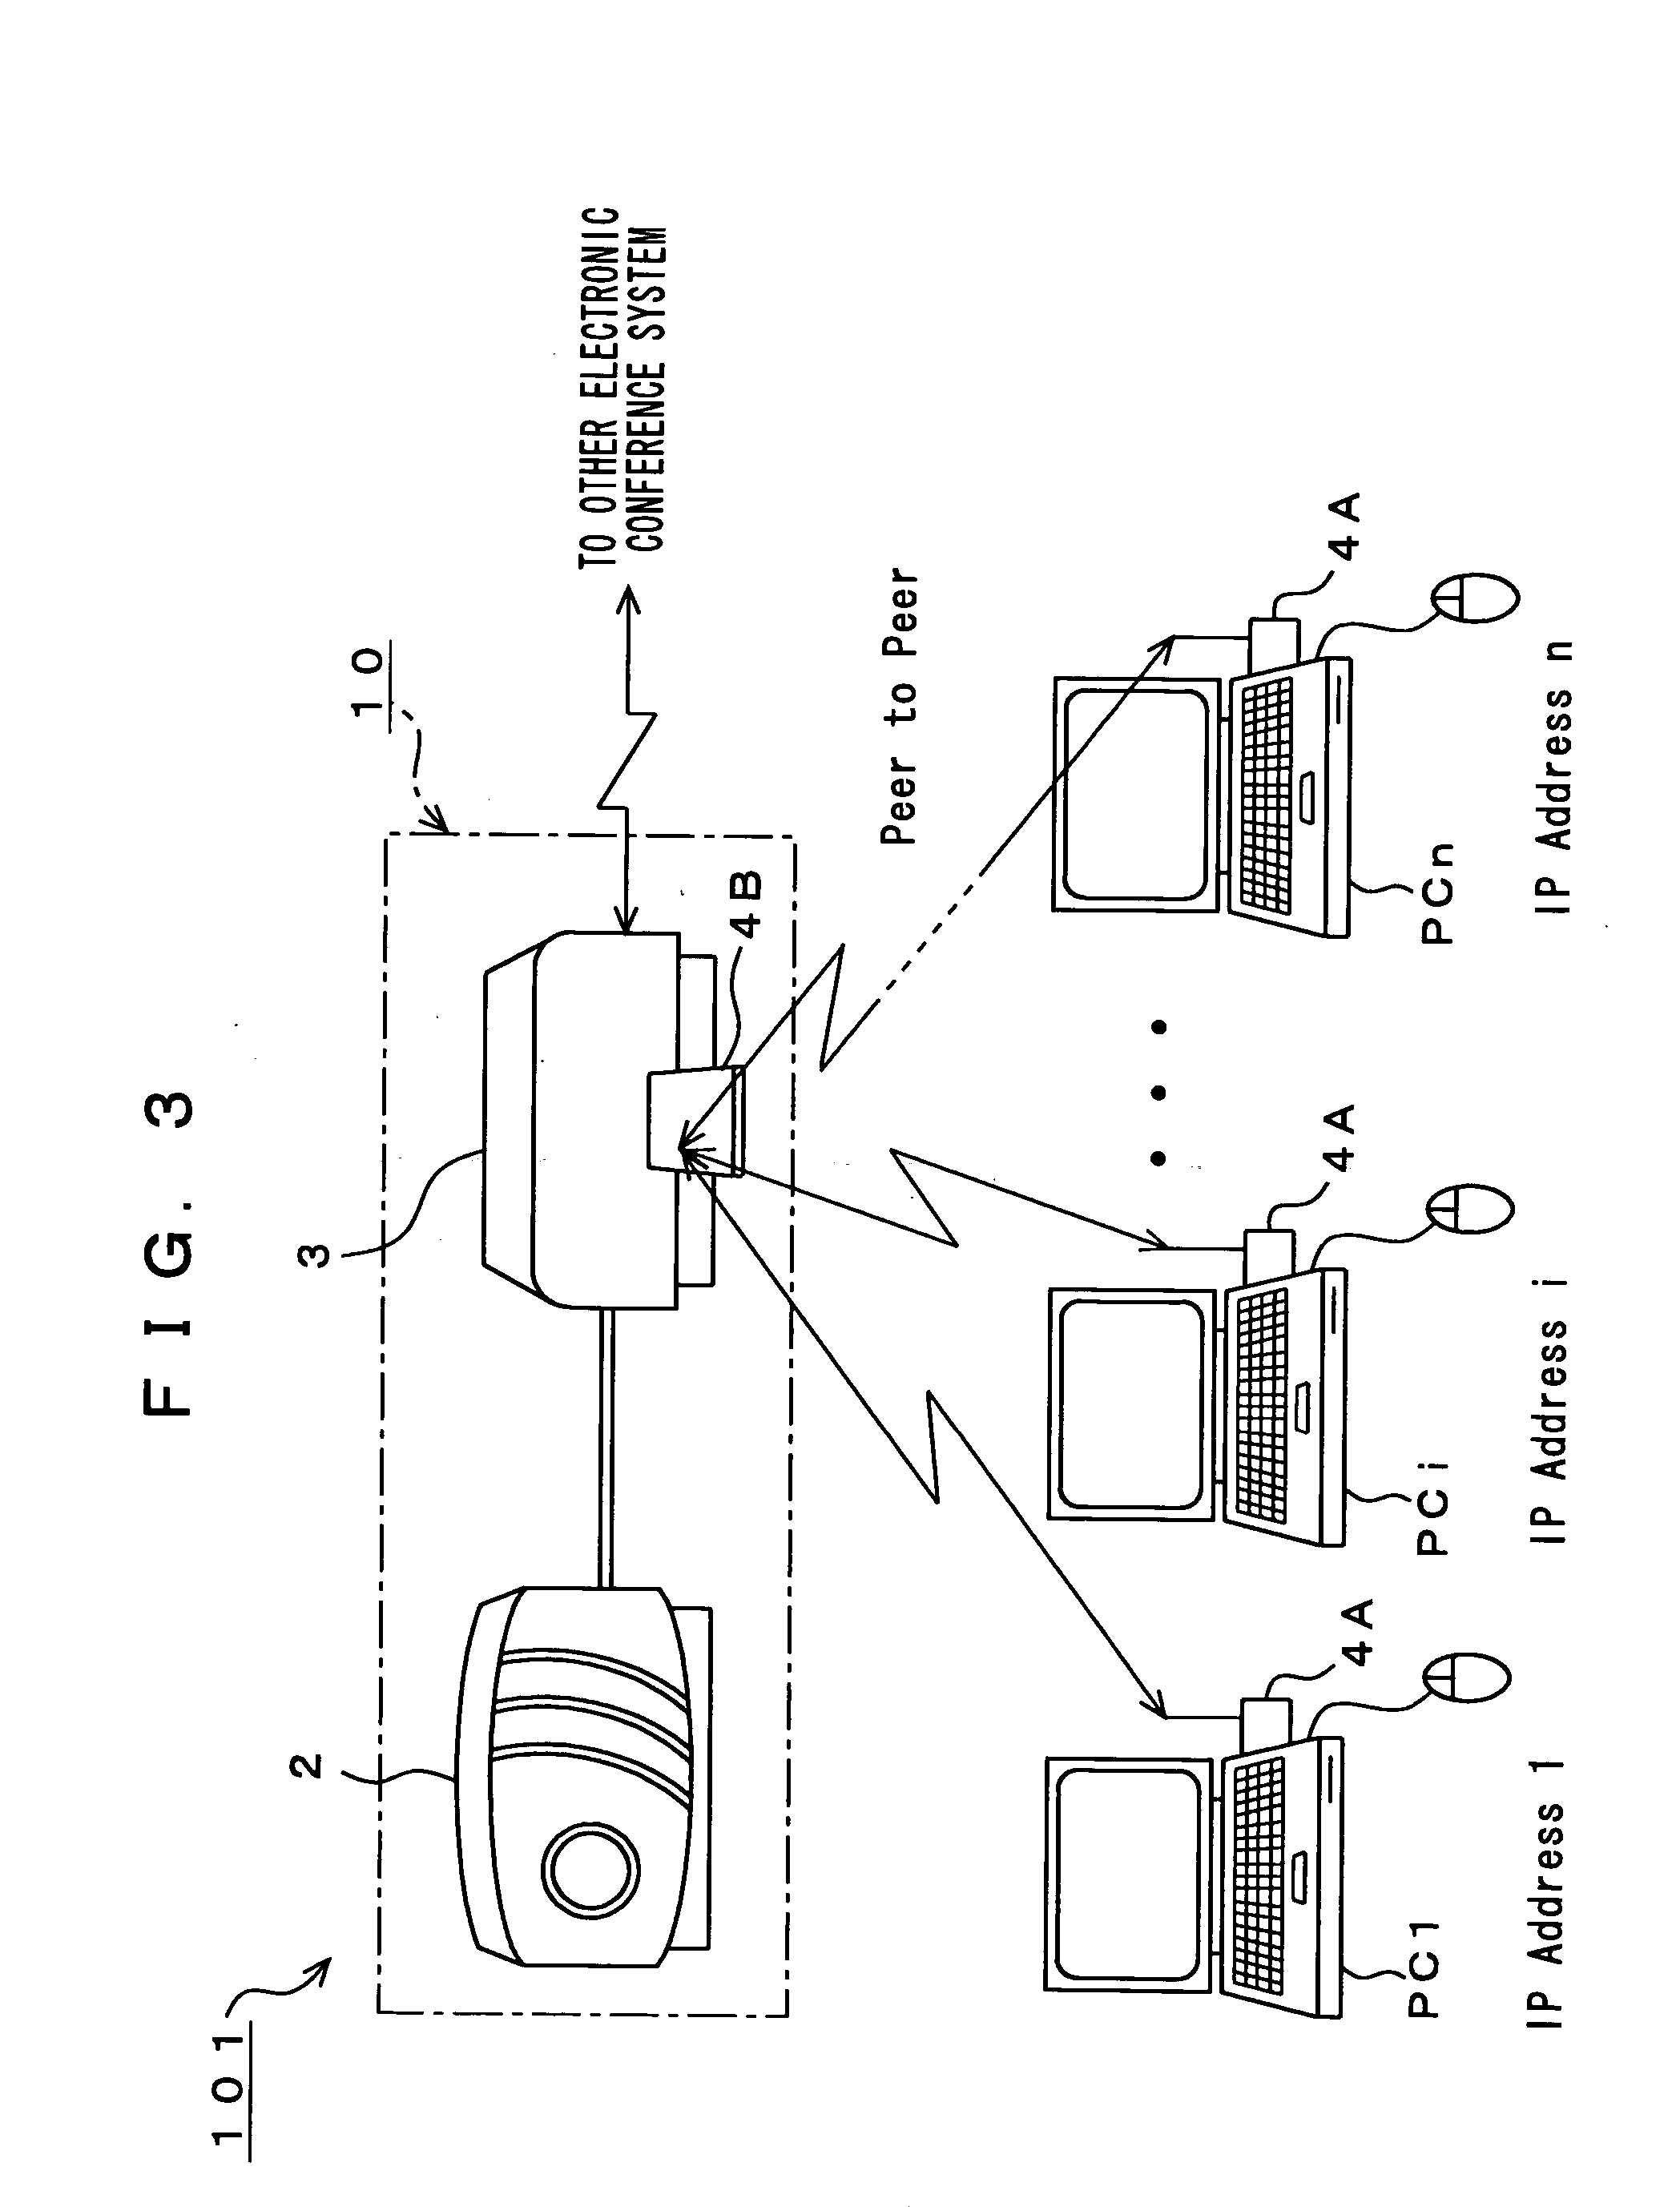 Network information processing system and network information processing method